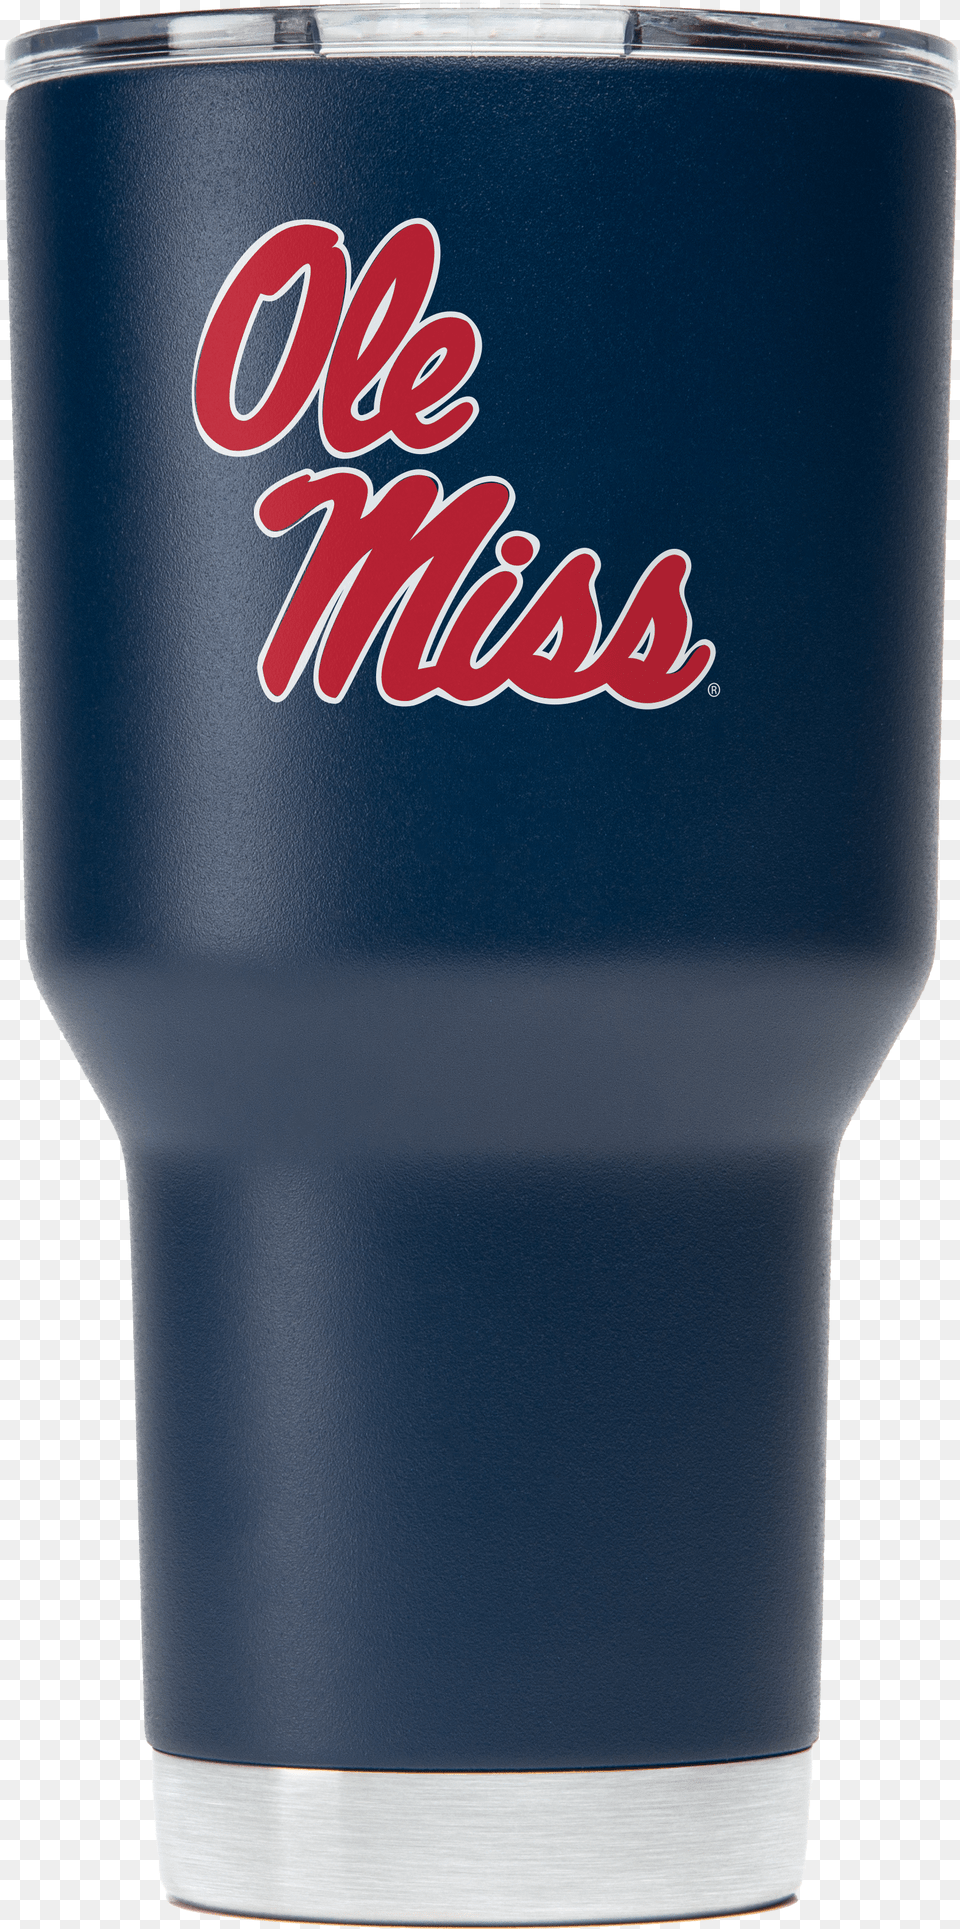 Ole Miss 30 Oz Navy Powder Coat Stainless Steel Tumbler Guinness Png